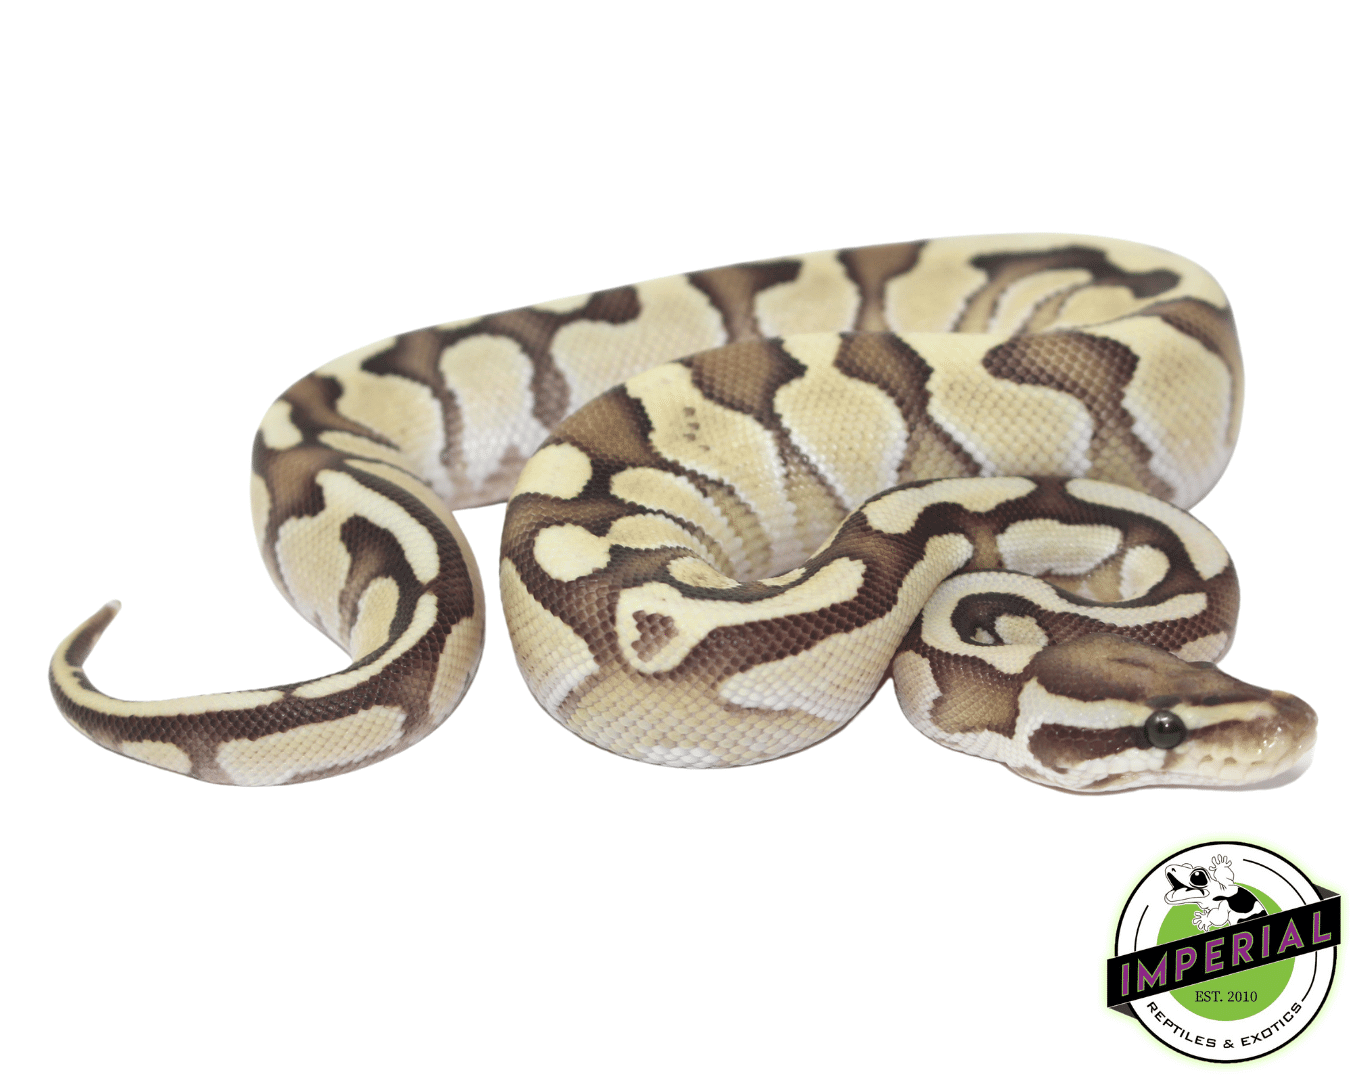 nuclear ball python for sale, buy reptiles online